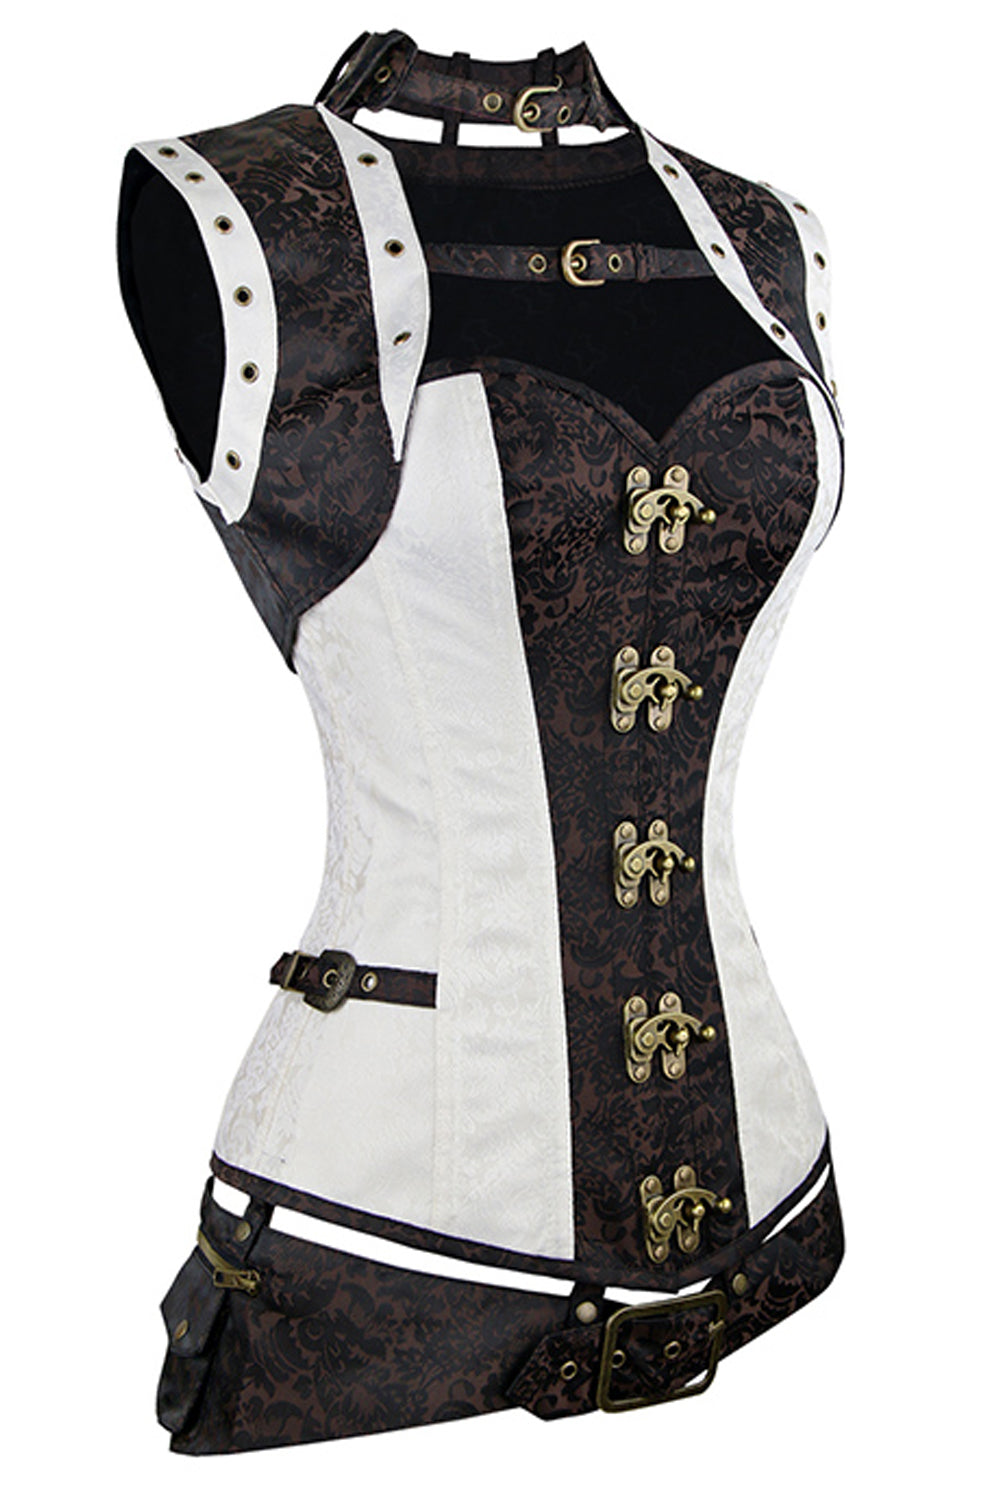 Atomic Two Toned Steel Boned Steampunk Overbust Corset